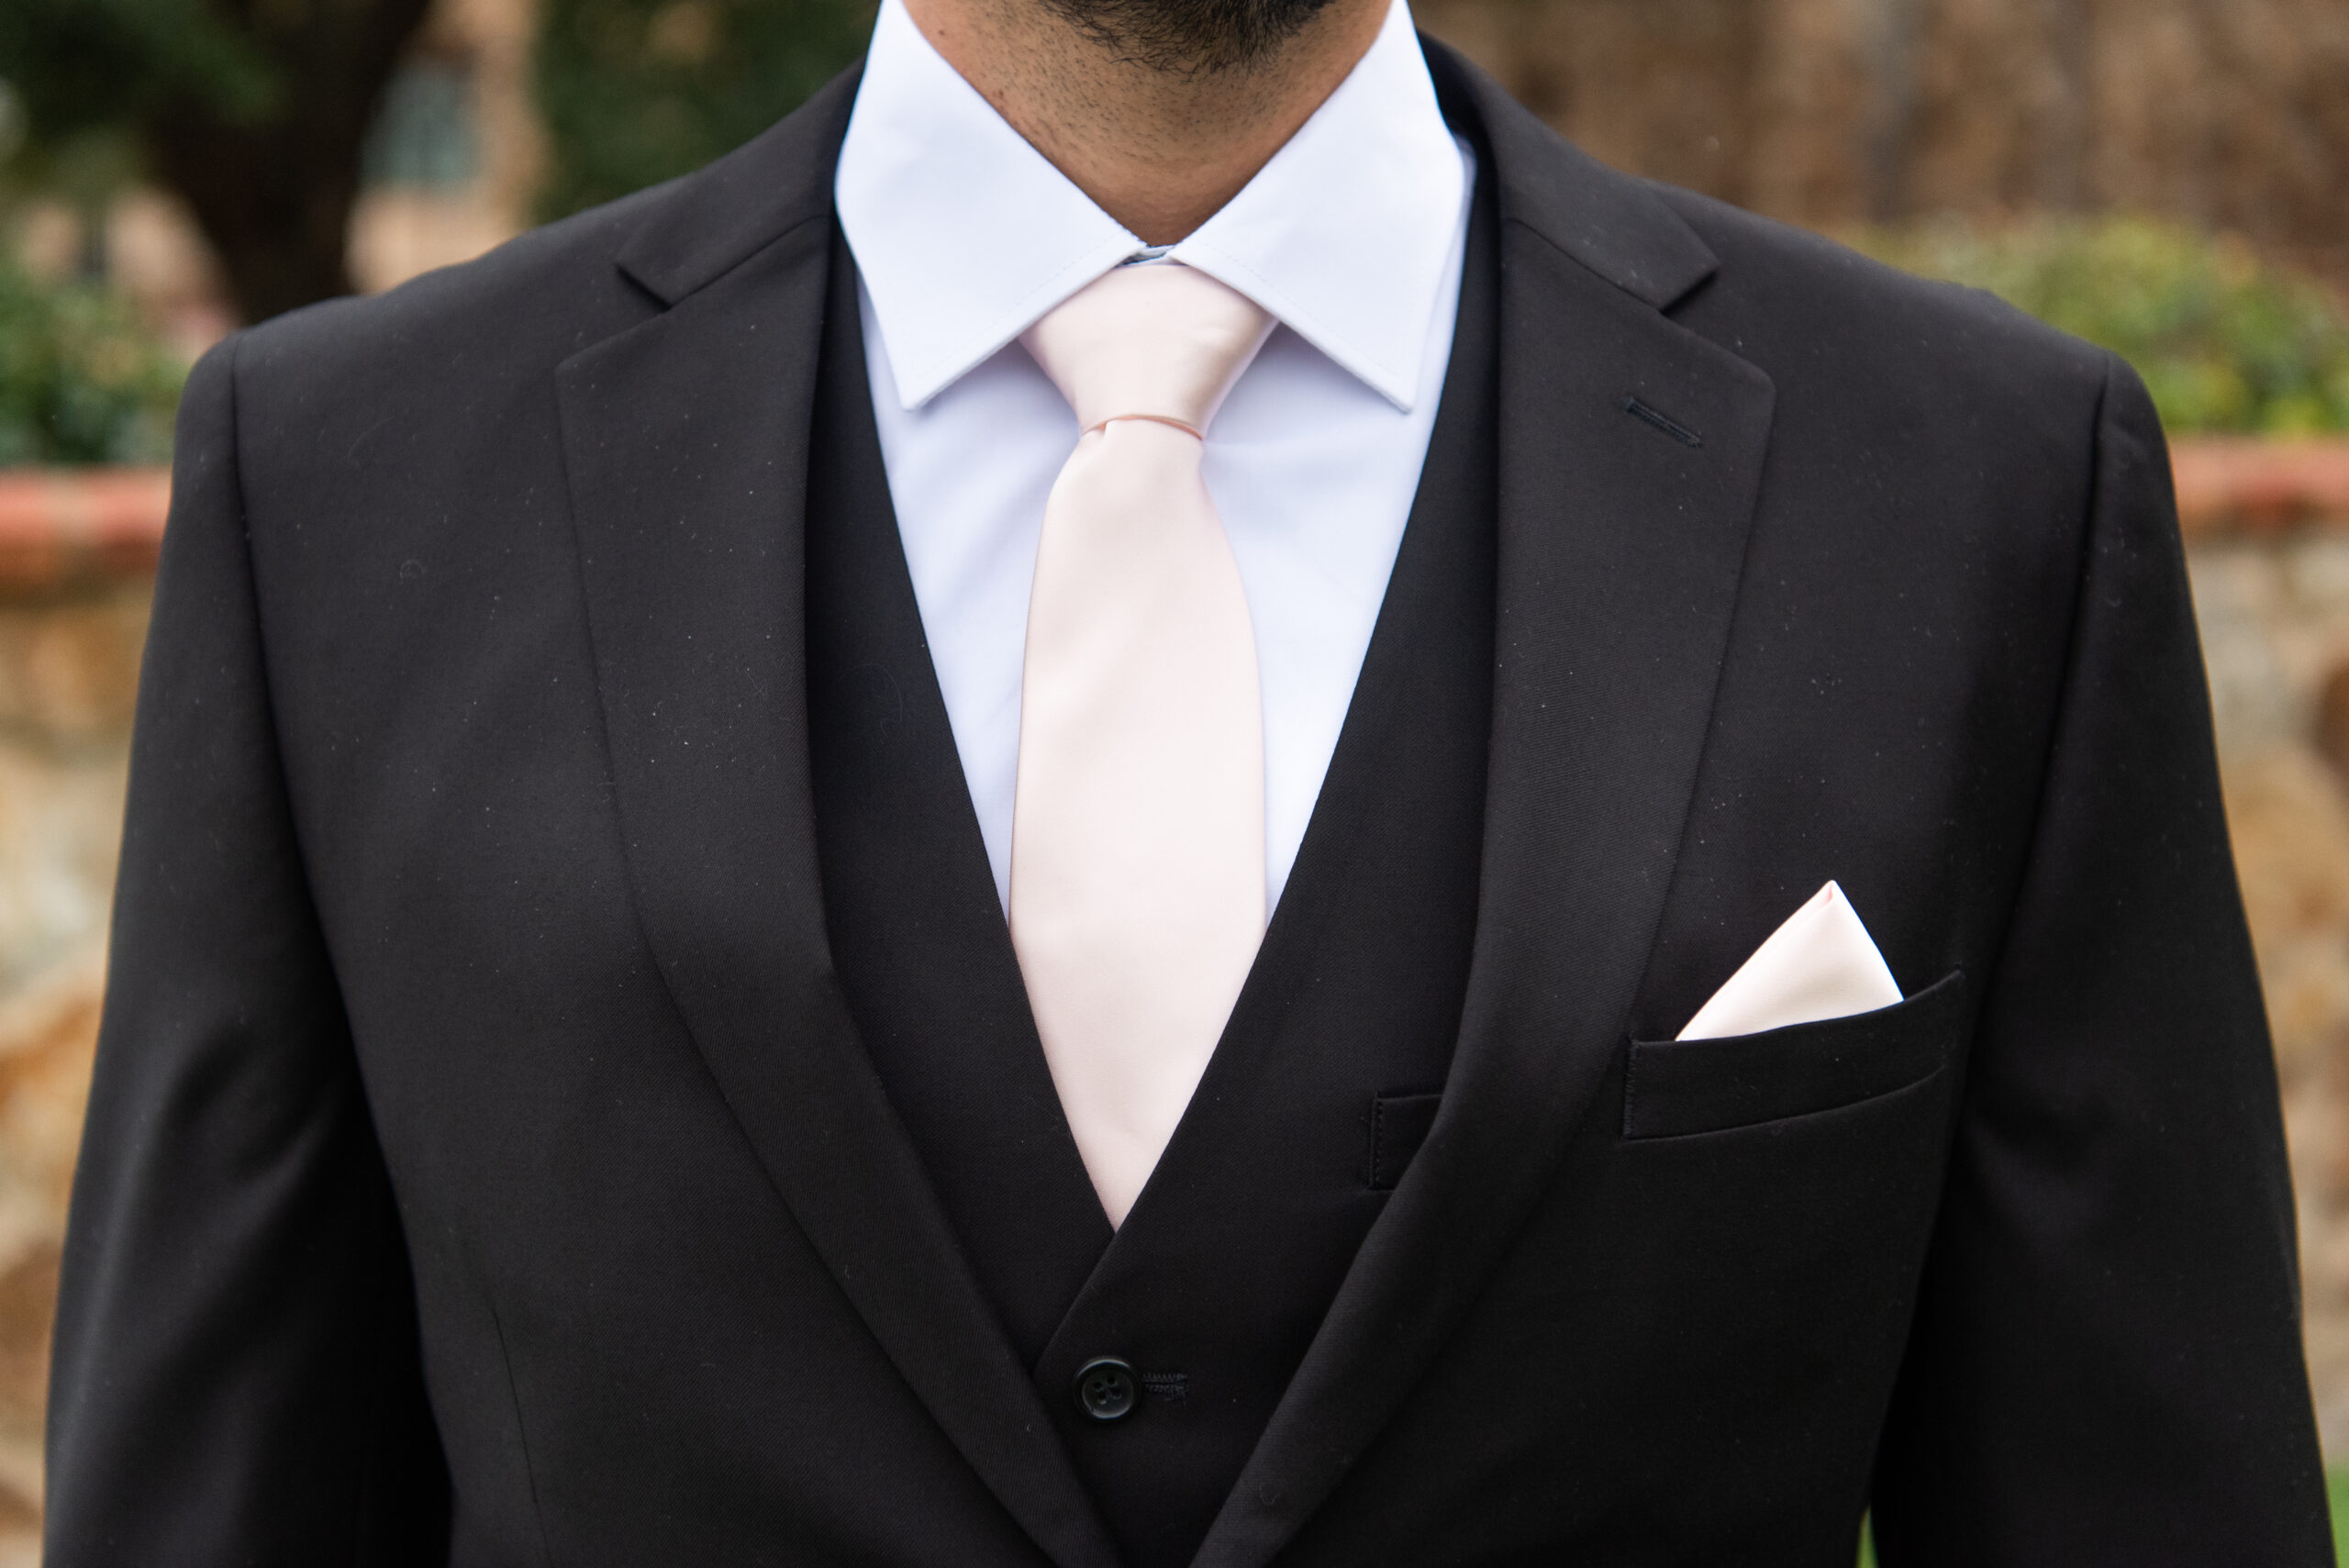 A man wearing a three-piece black suit with a pale pink tie and matching pocket square